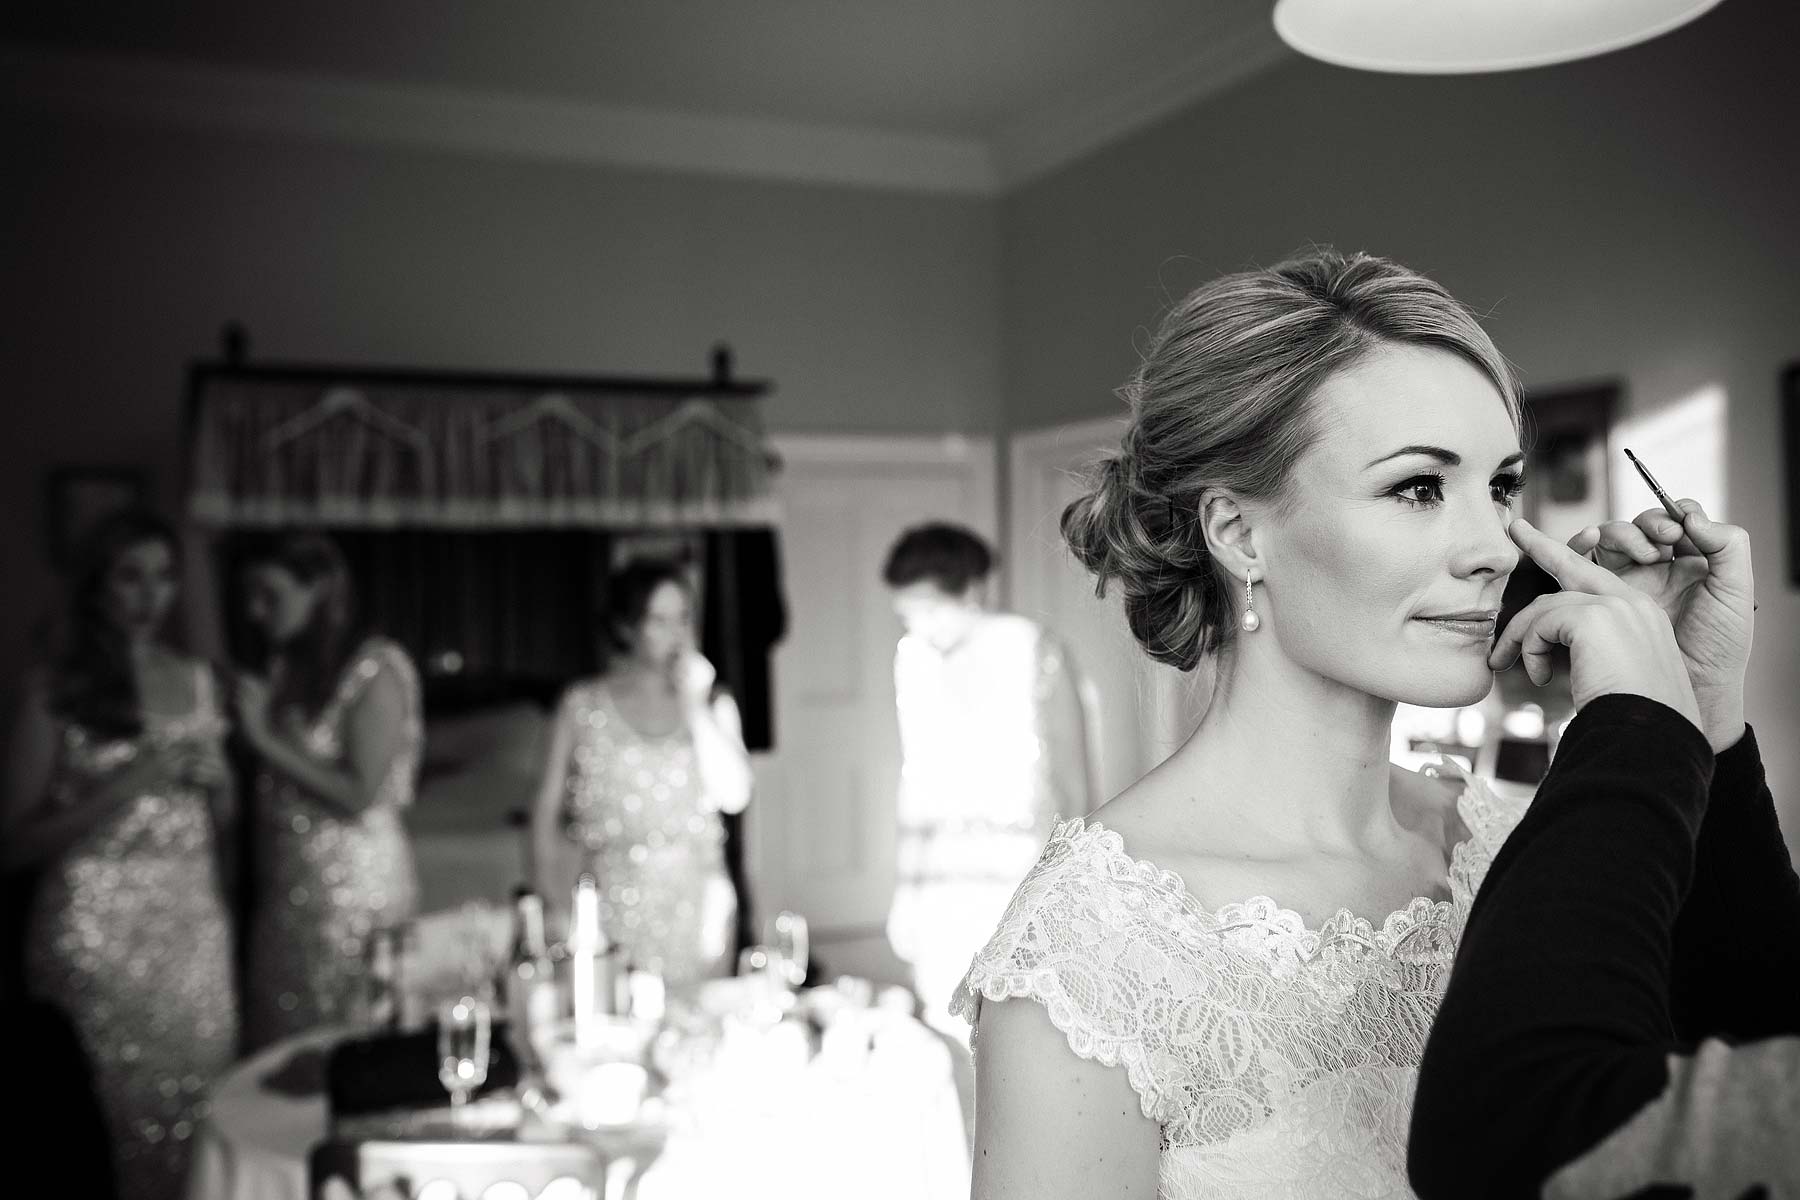 Unobtrusive photography of the bride dressing and final preparations before the wedding at Sandon Hall in Stafford by Stafford Recommended Wedding Photographer Stuart James